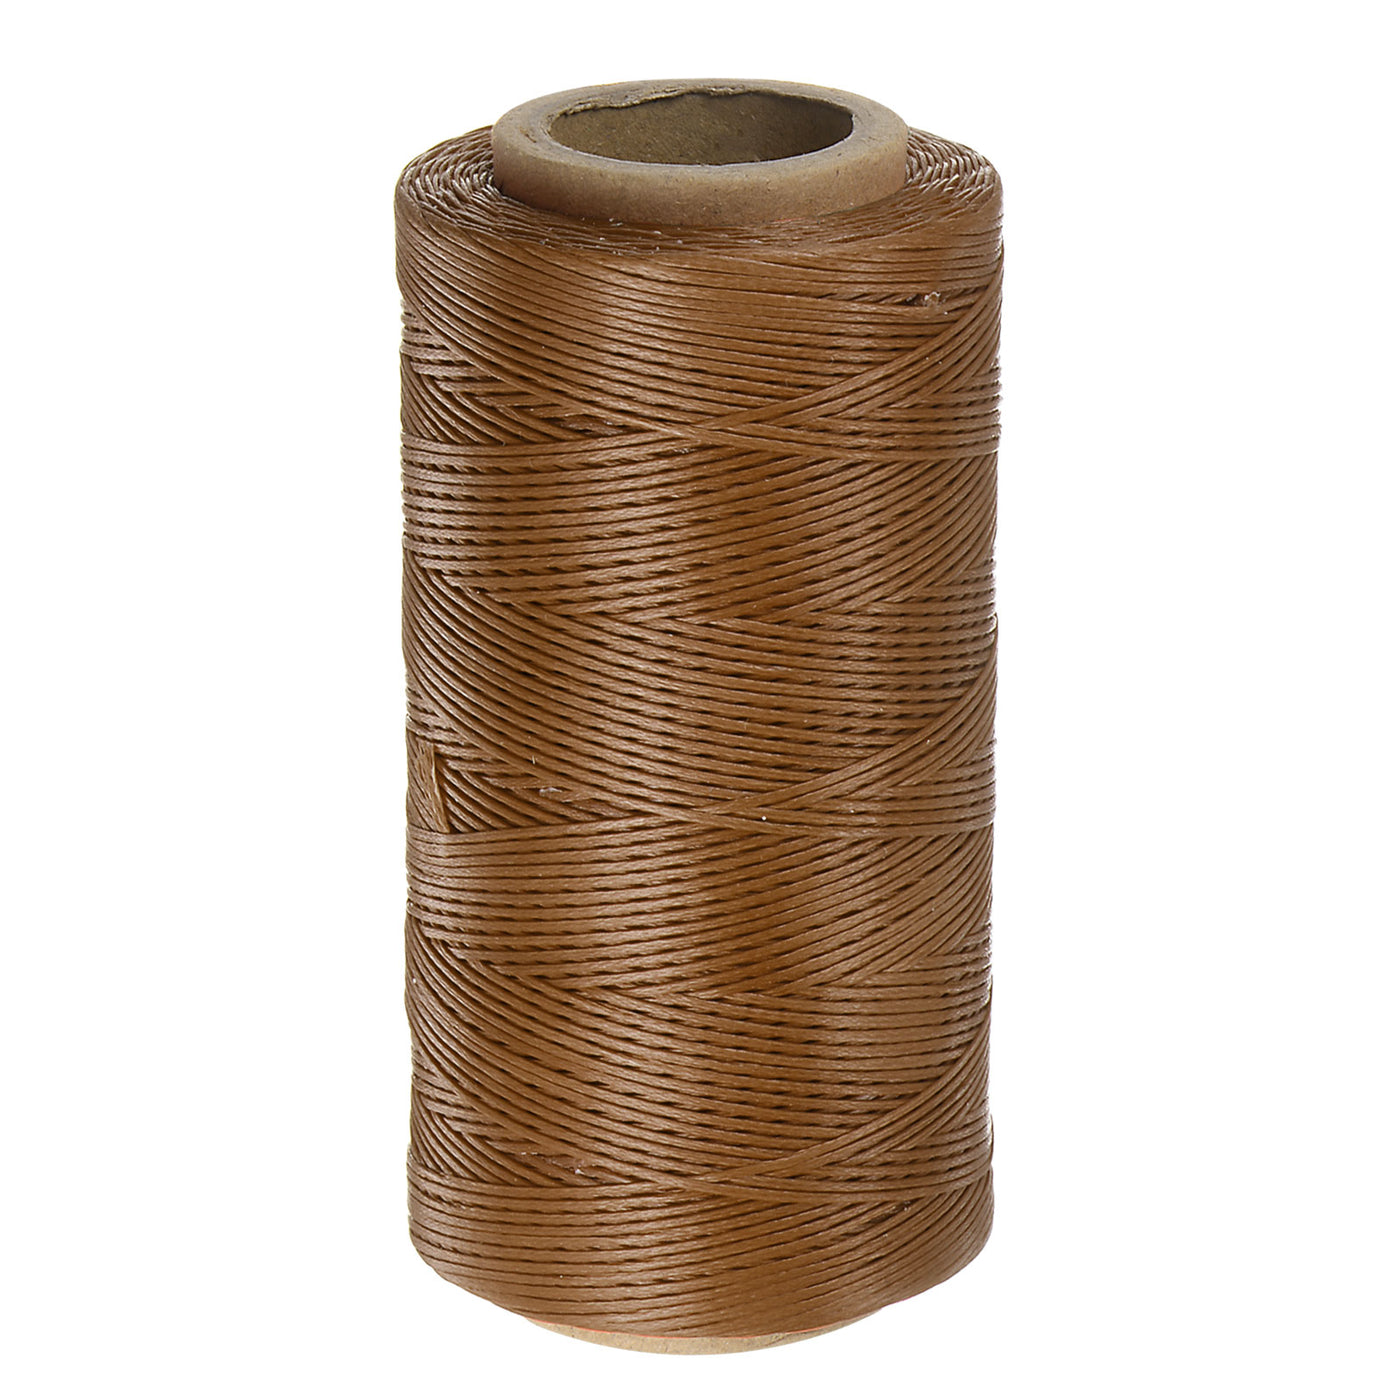 Harfington Upholstery Sewing Thread 284 Yards 260m Polyester String Brown